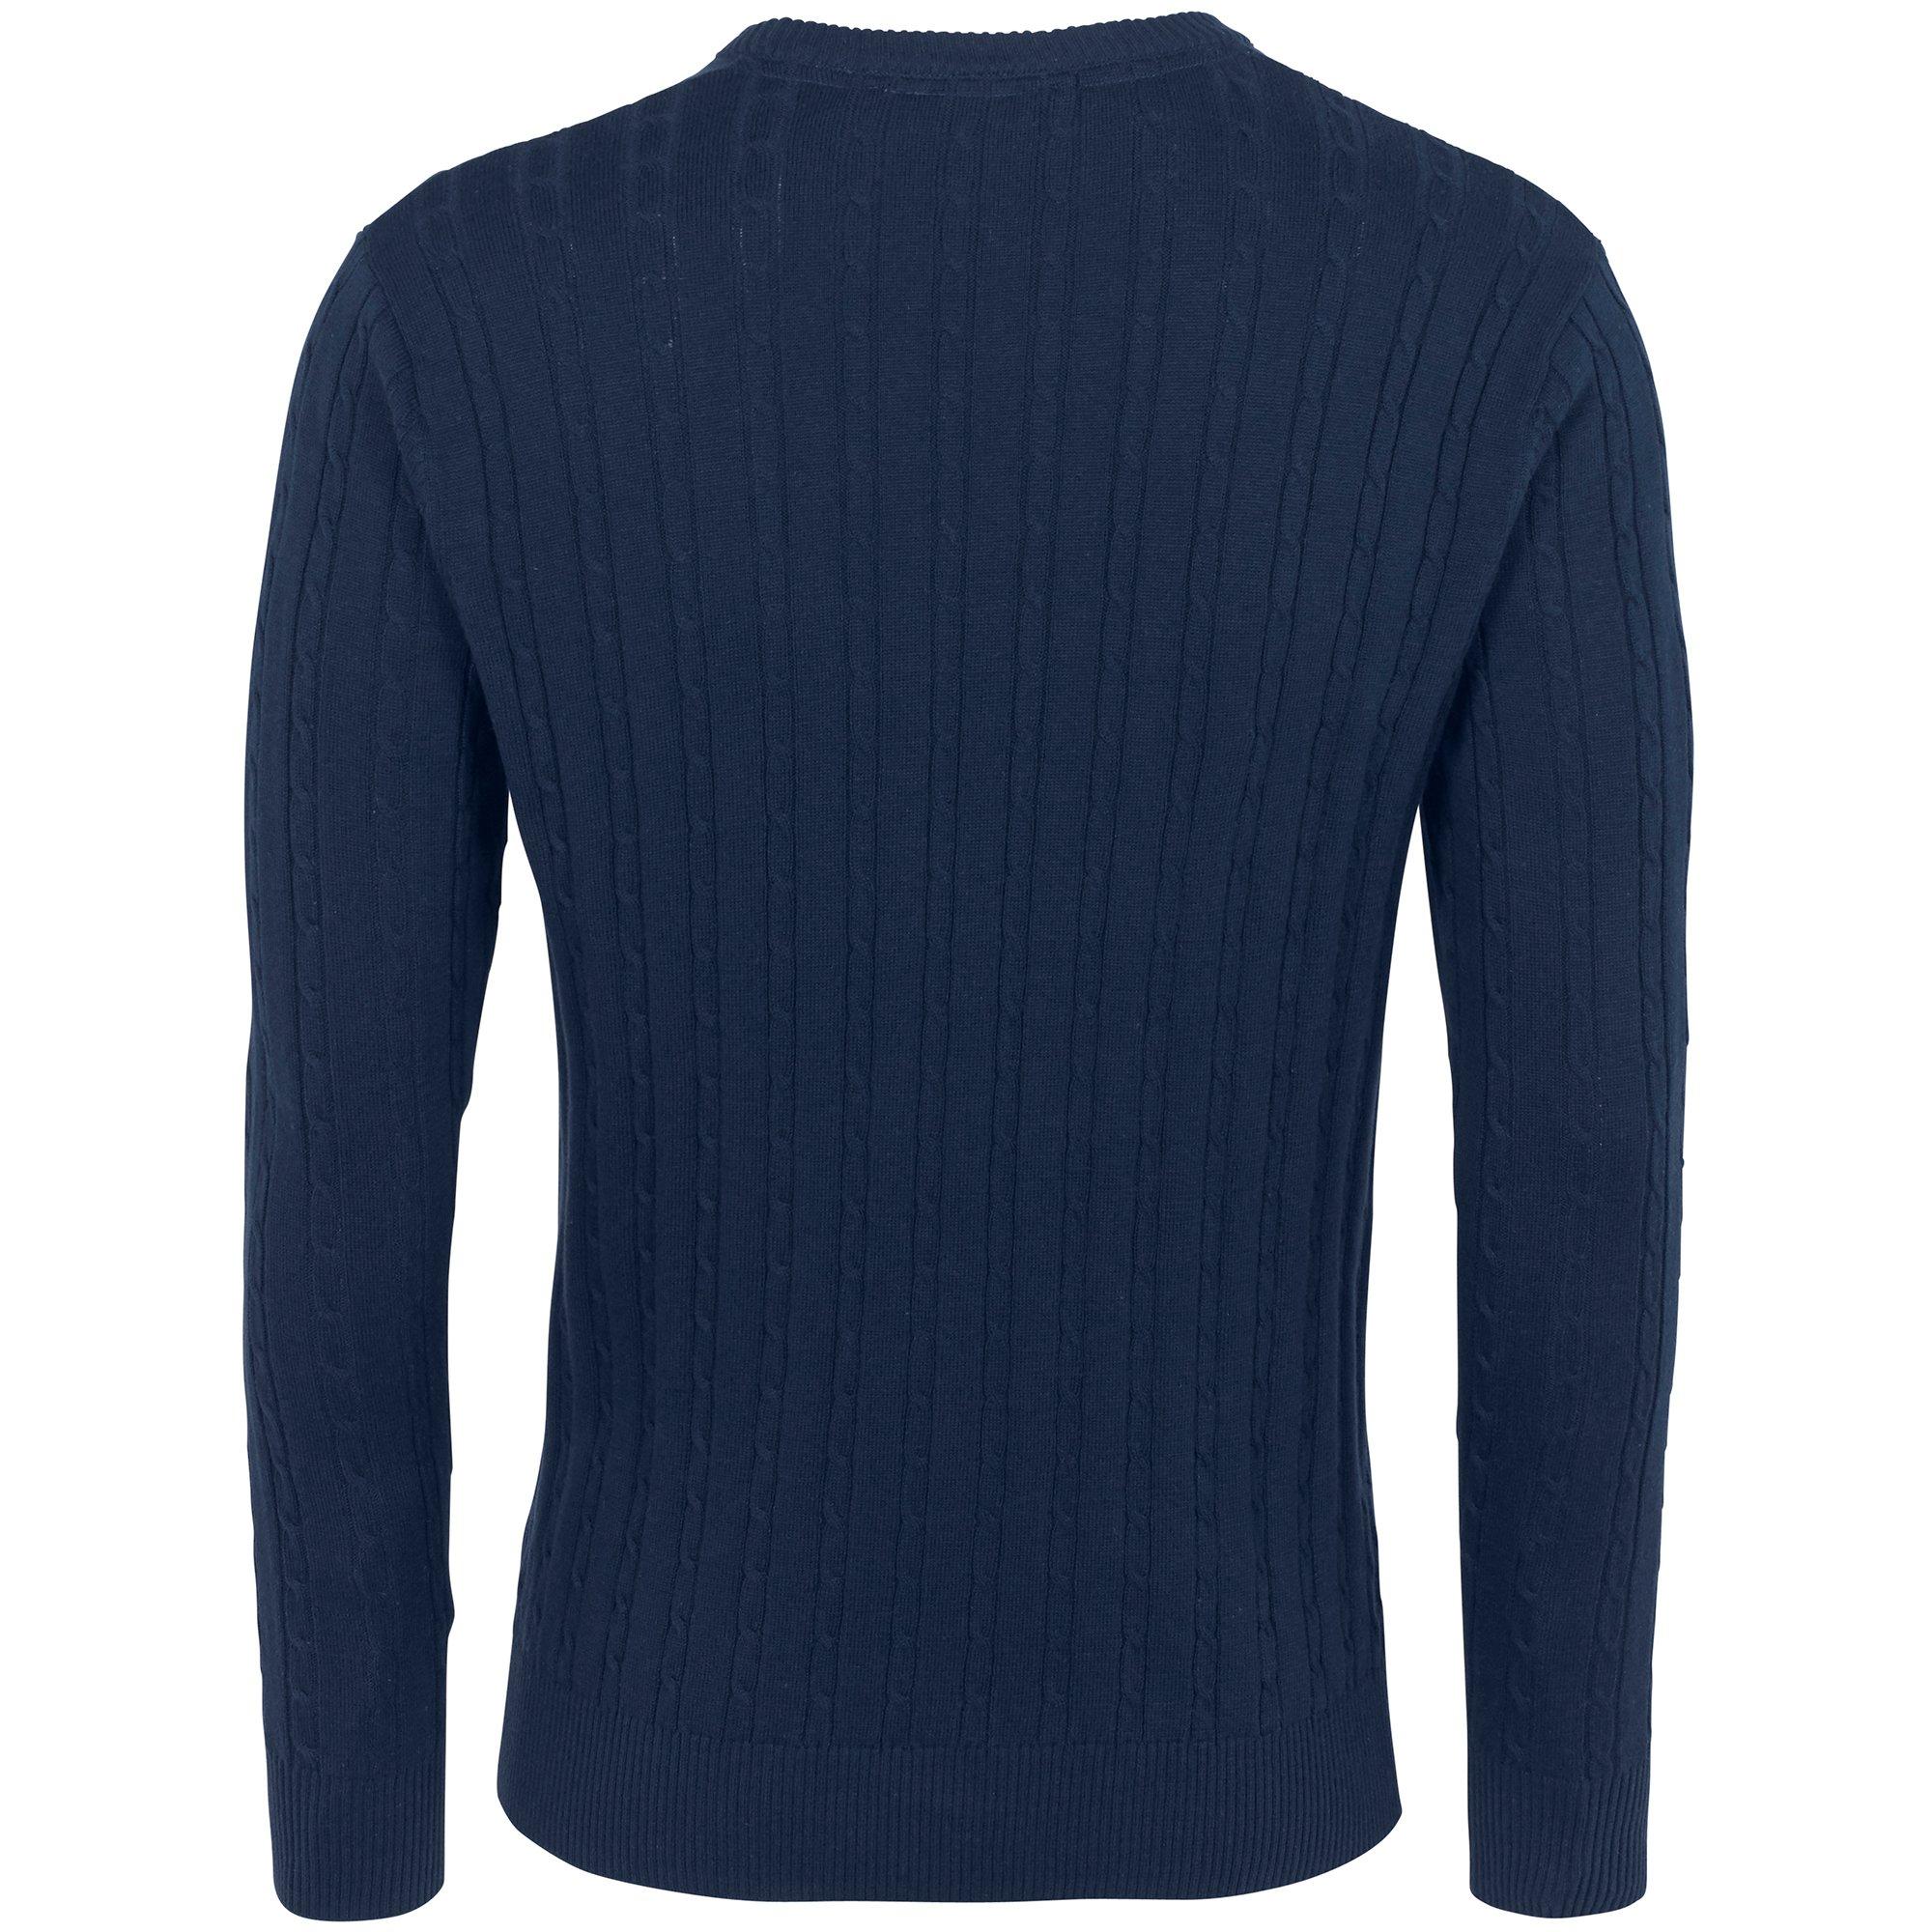 Arsenal Cable Knit Jumper | Official Arsenal Online Store